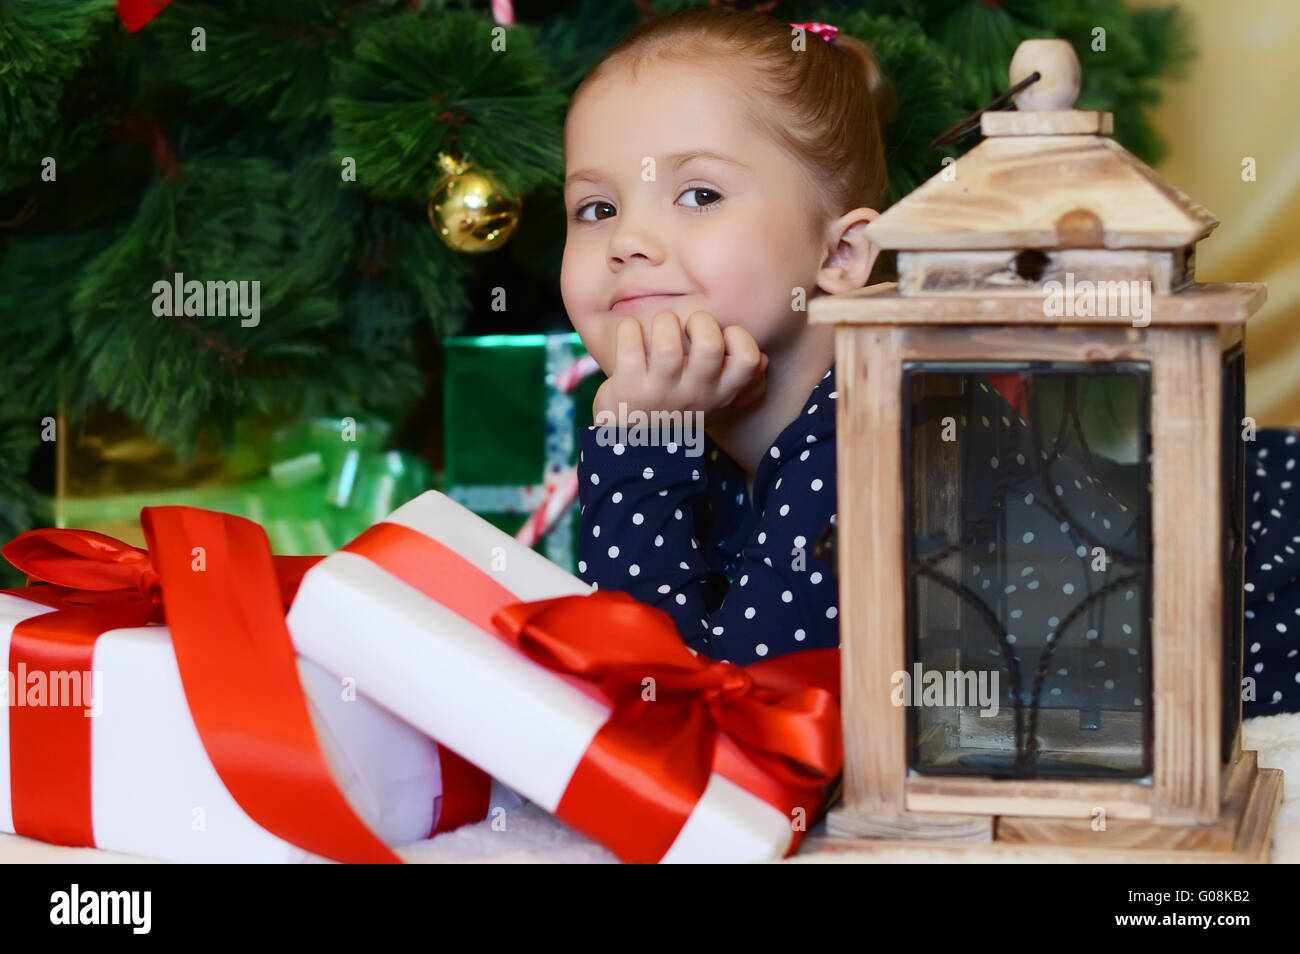 The little girl at a Christmas fur-tree with gifts Stock Photo